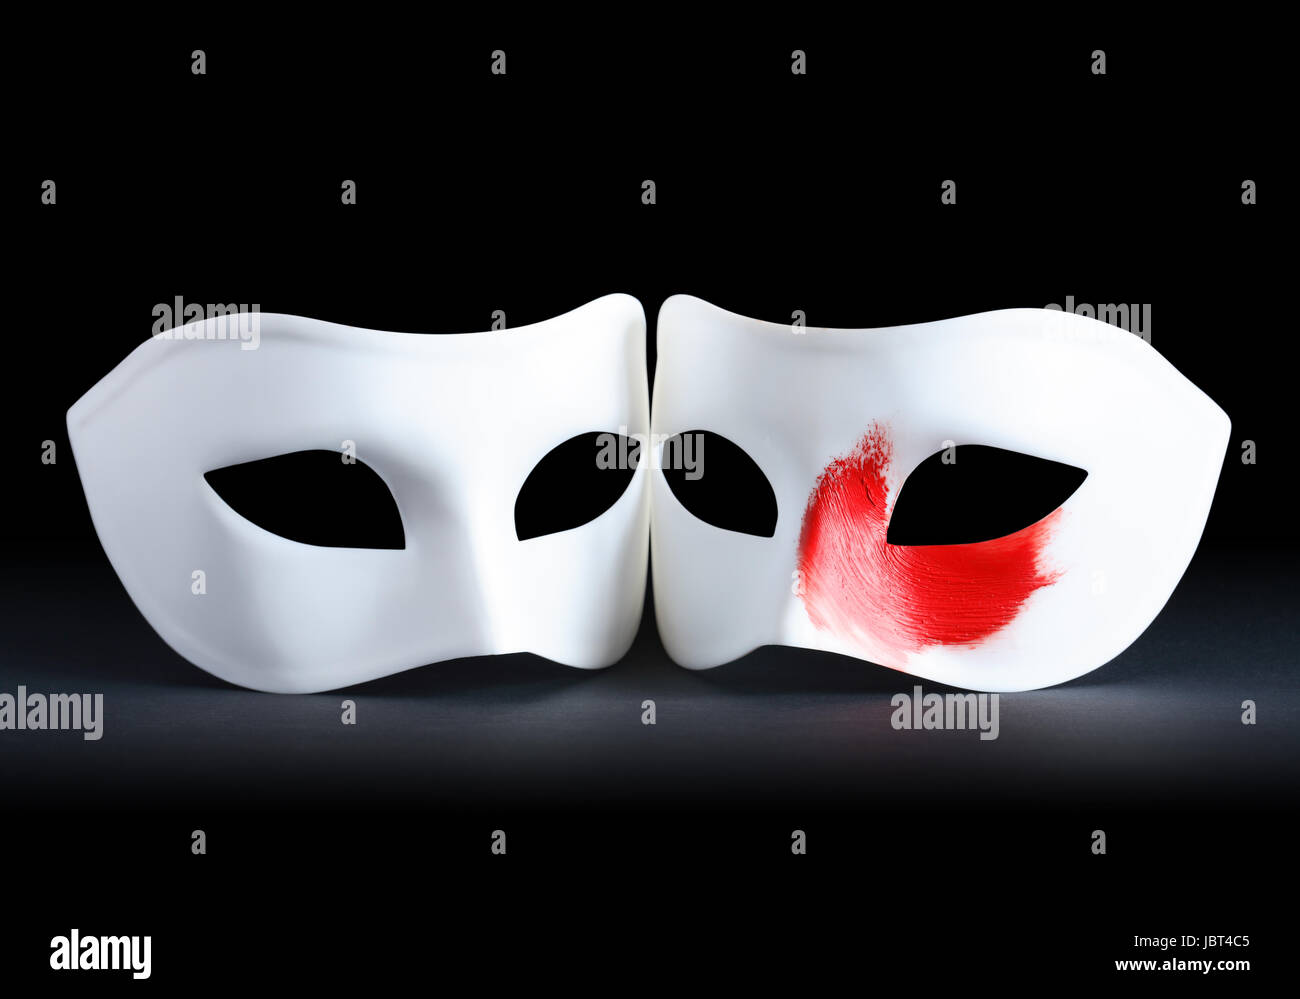 Two white masks on black background. One mask with red spot of paint Stock Photo